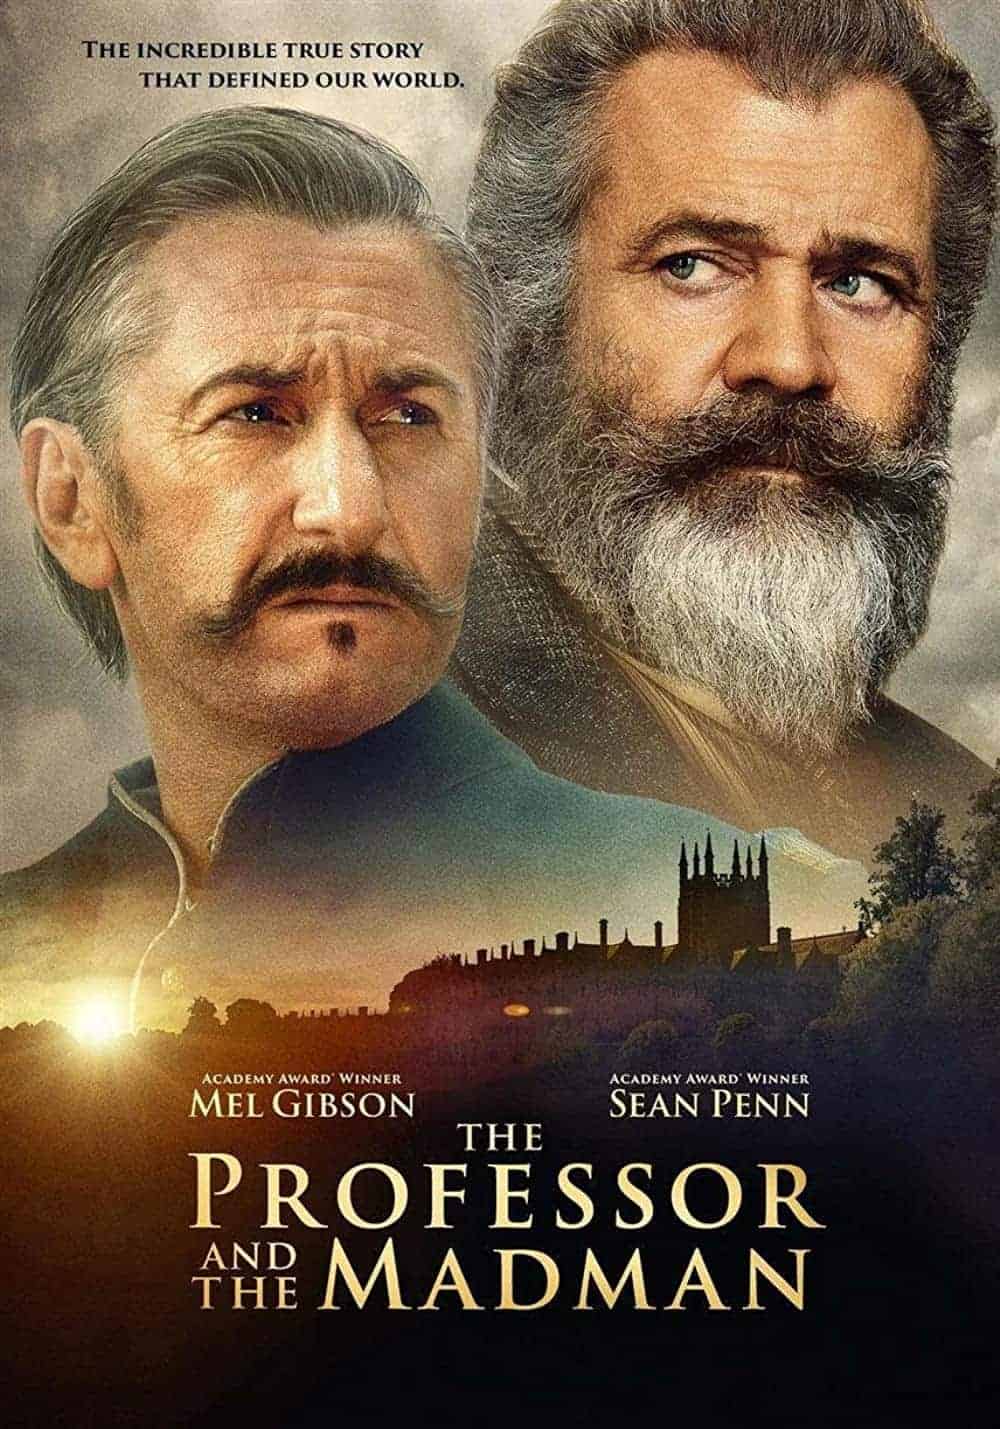 The Professor and the Madman (2019) Best Movies Starring Mel Gibson